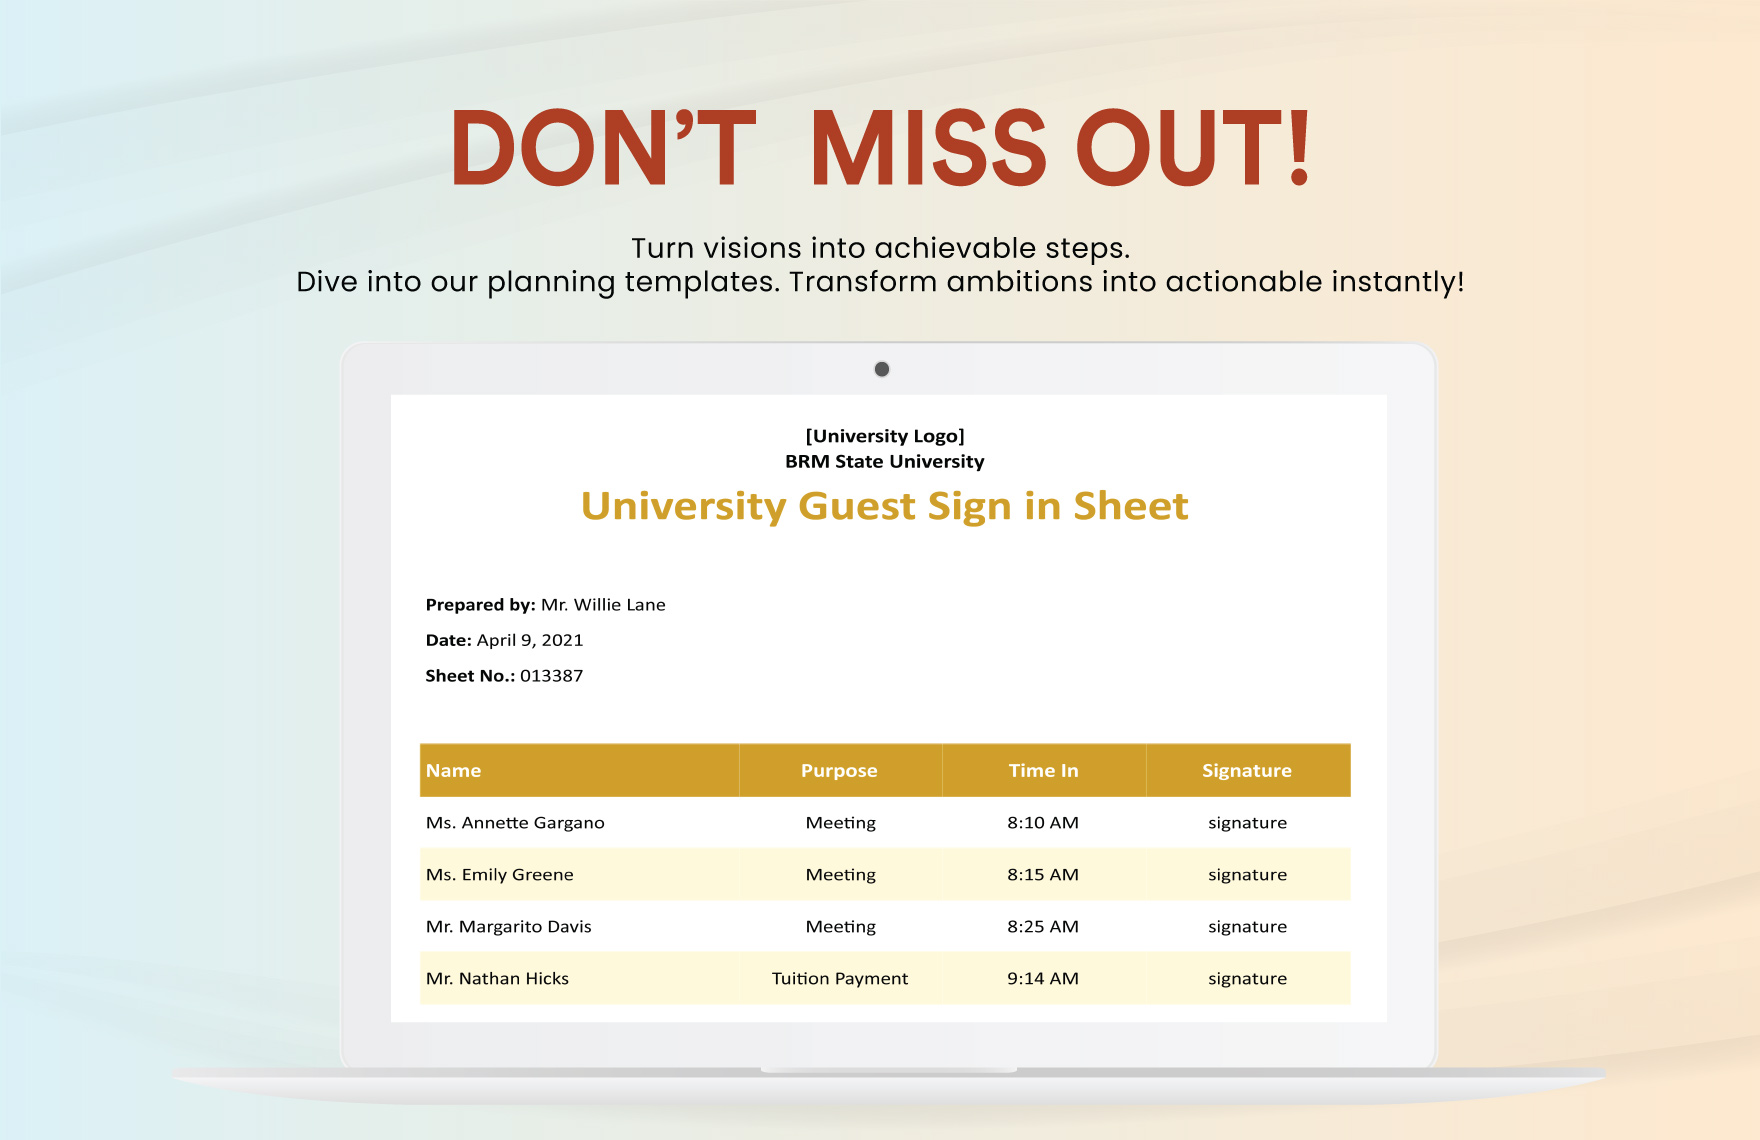 University Guest Sign in Sheet Template